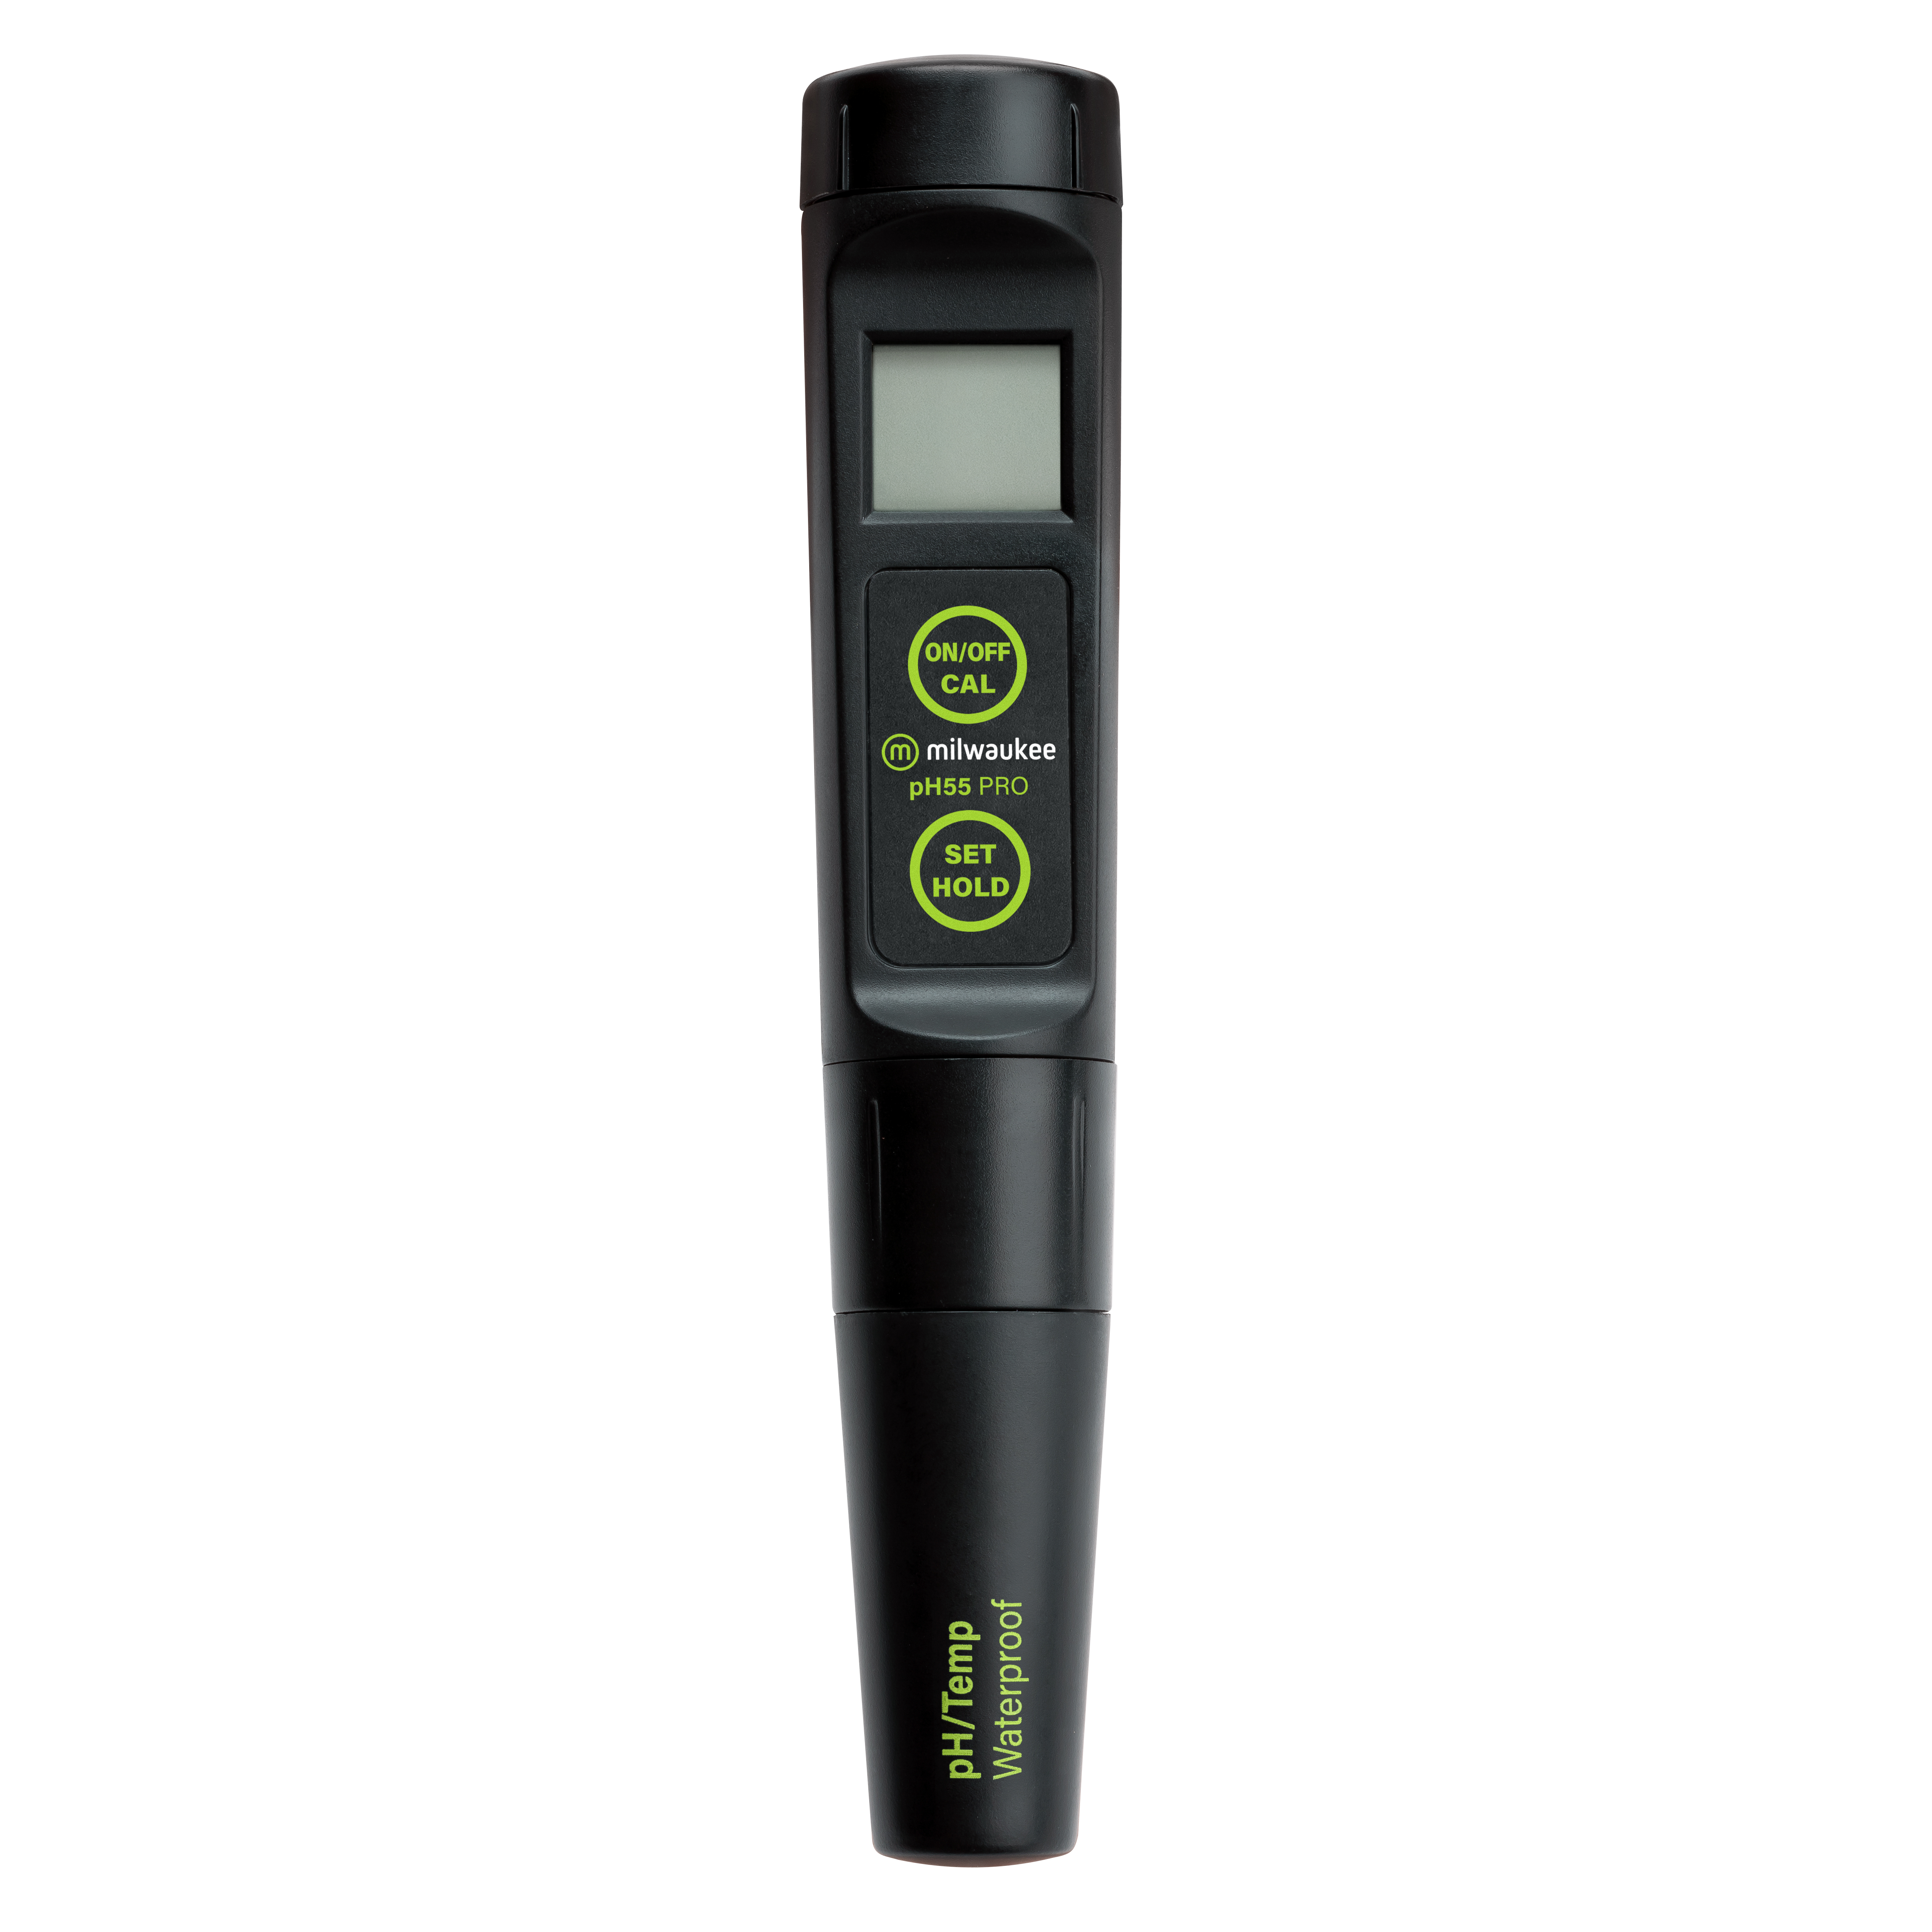 Milwaukee PH55 waterproof pH / Temperature Tester with automatic temperature compensation (ATC) and replaceable probe